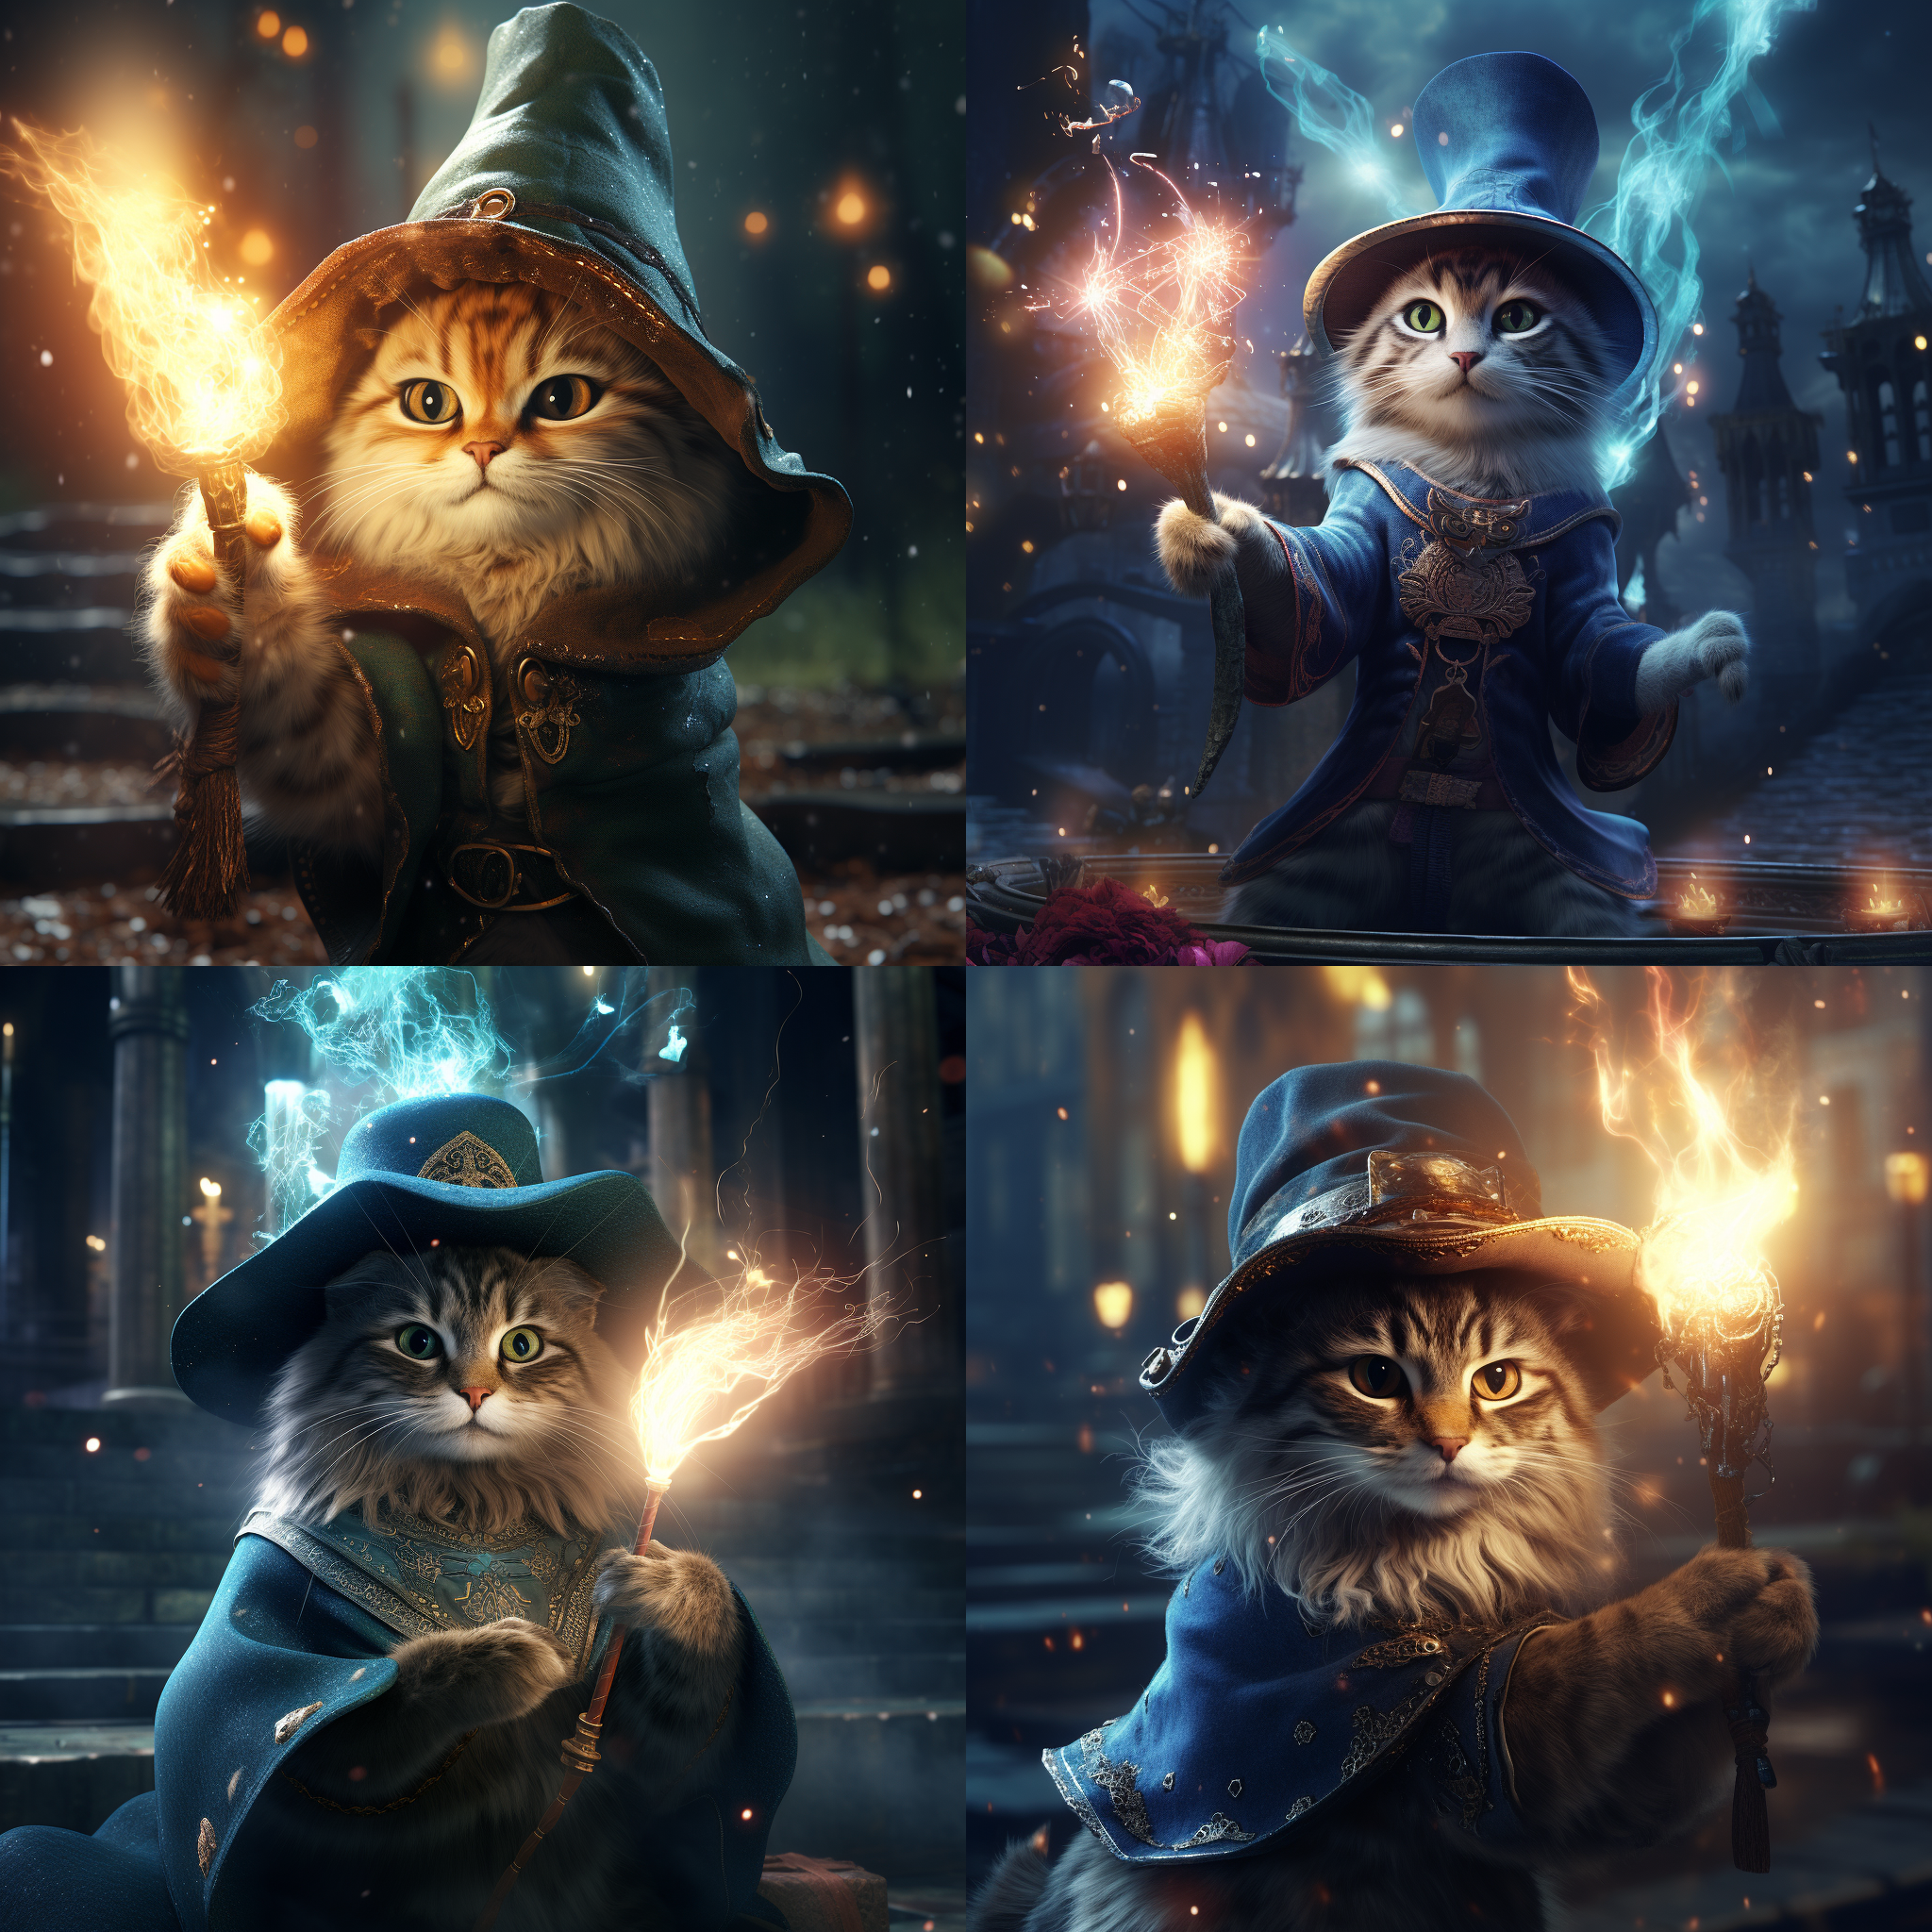 A mystical sorcerer cat wearing a magical hat, casting spells in a fantasy world